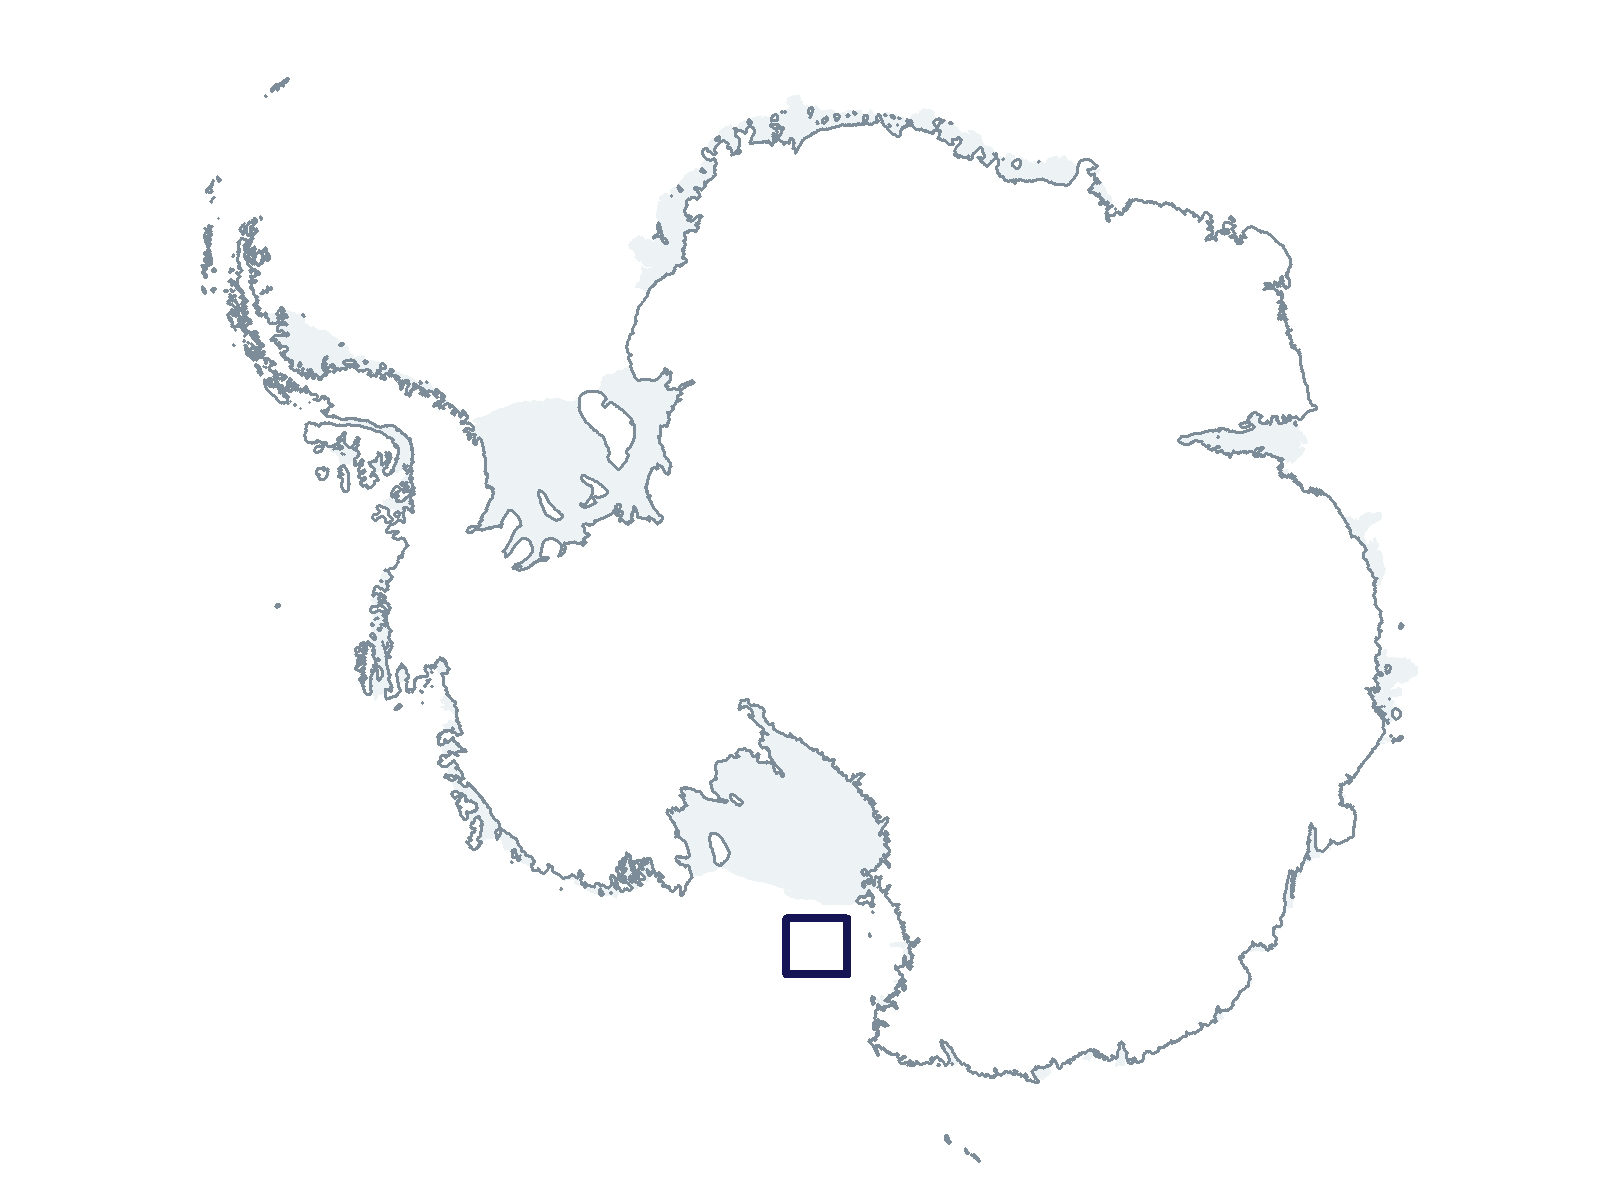 T-988-N Research Location(s): Ross Sea